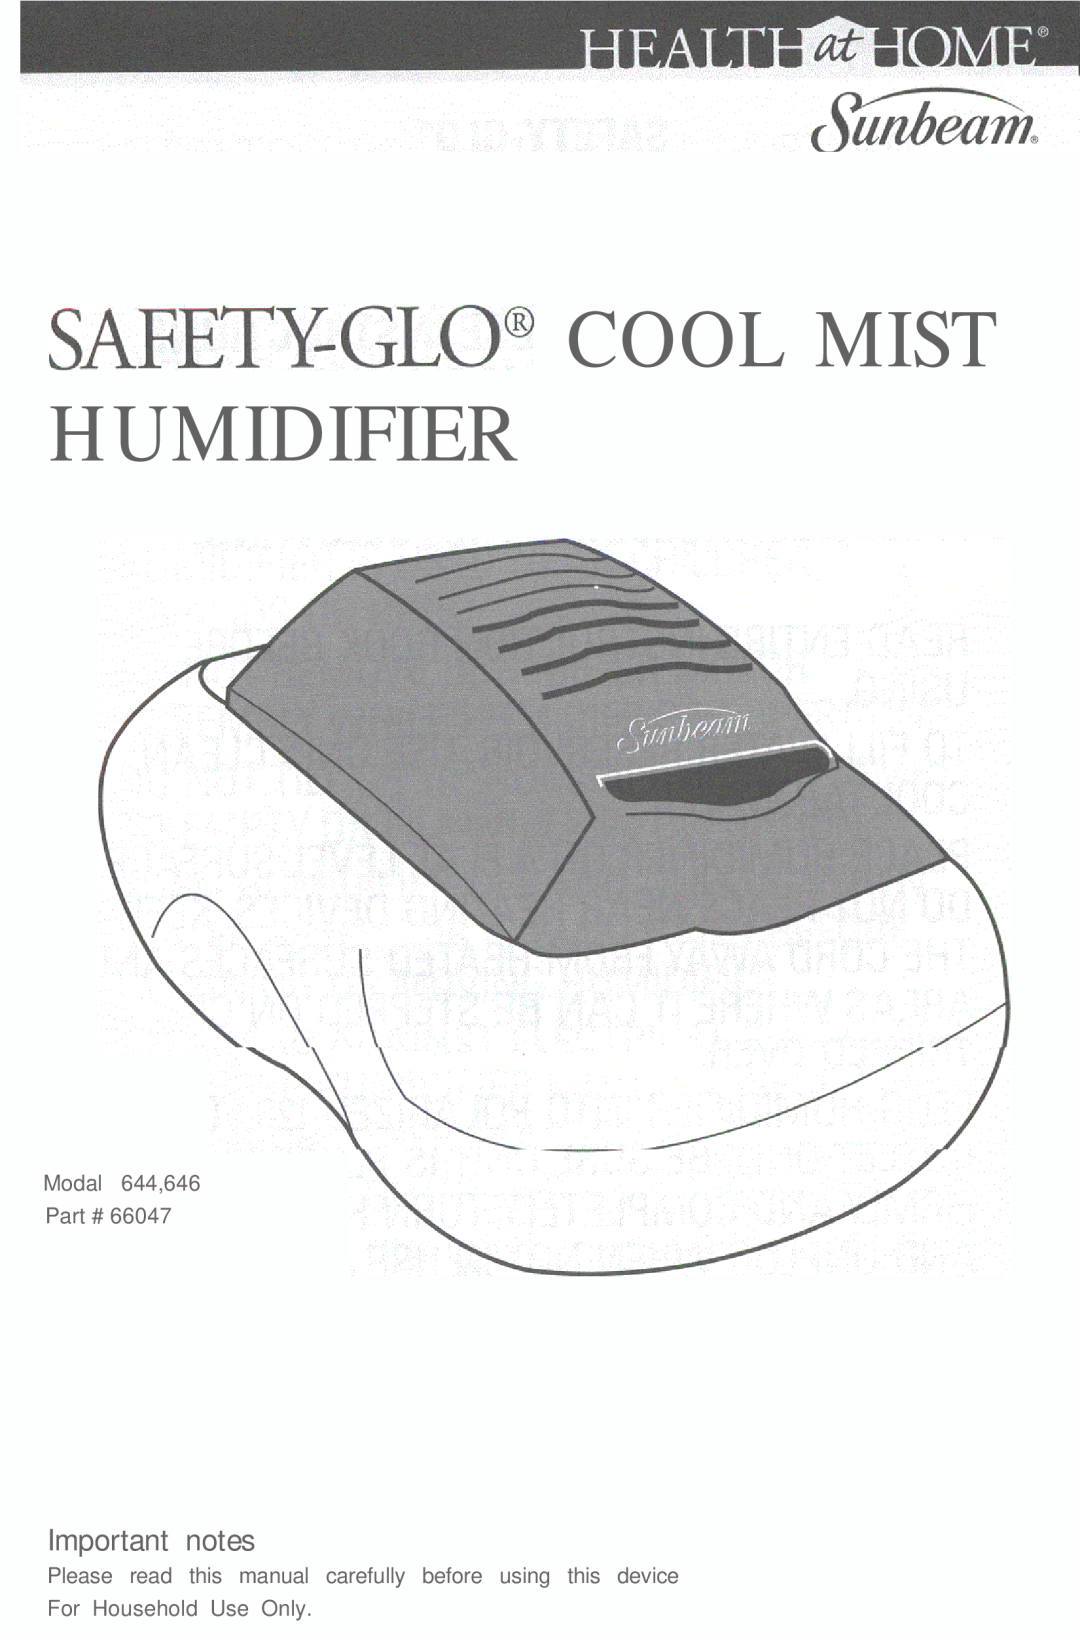 Sunbeam manual Safety-Glo@ Cool Mist Humidifier, Important notes, Modal 644,646 